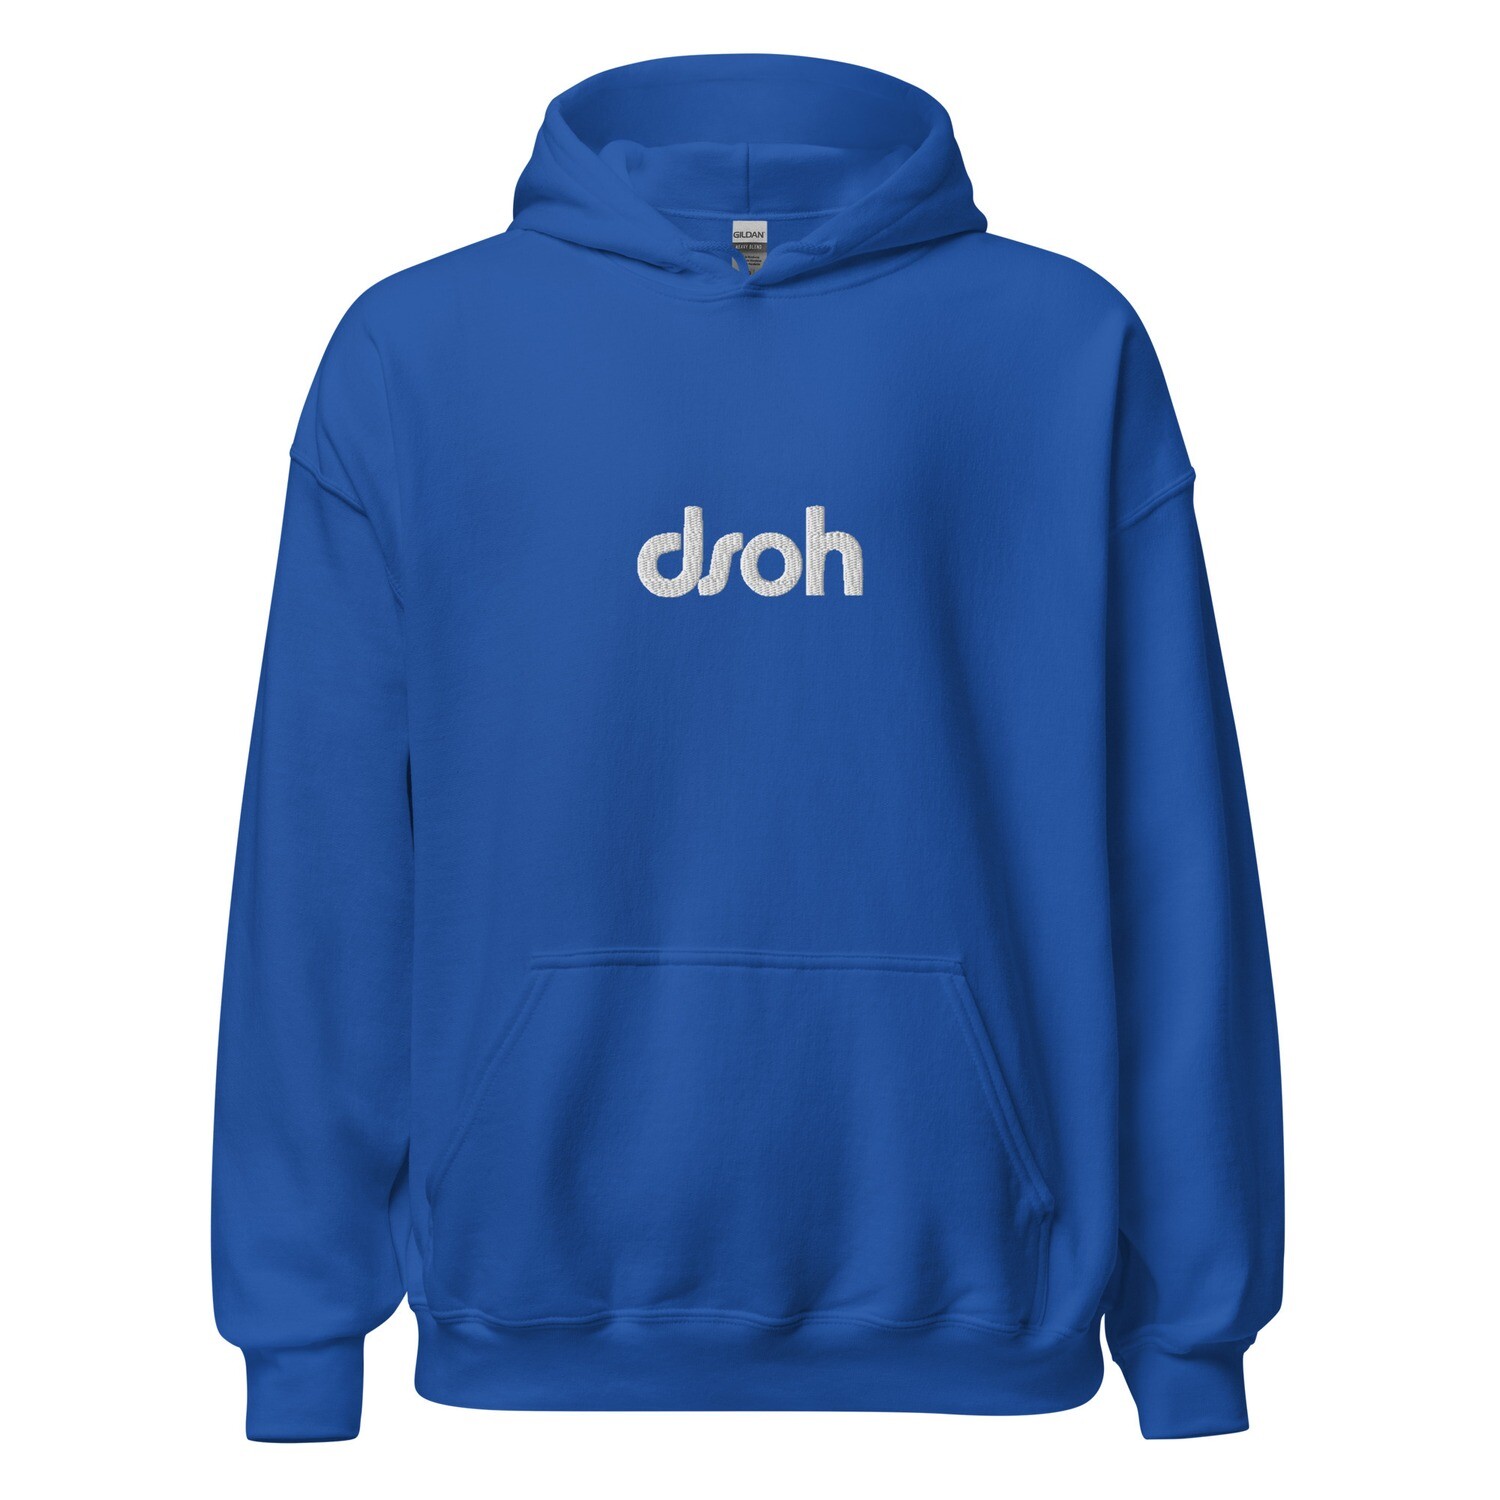 DSOH Hoodie - Embroidered Center Logo